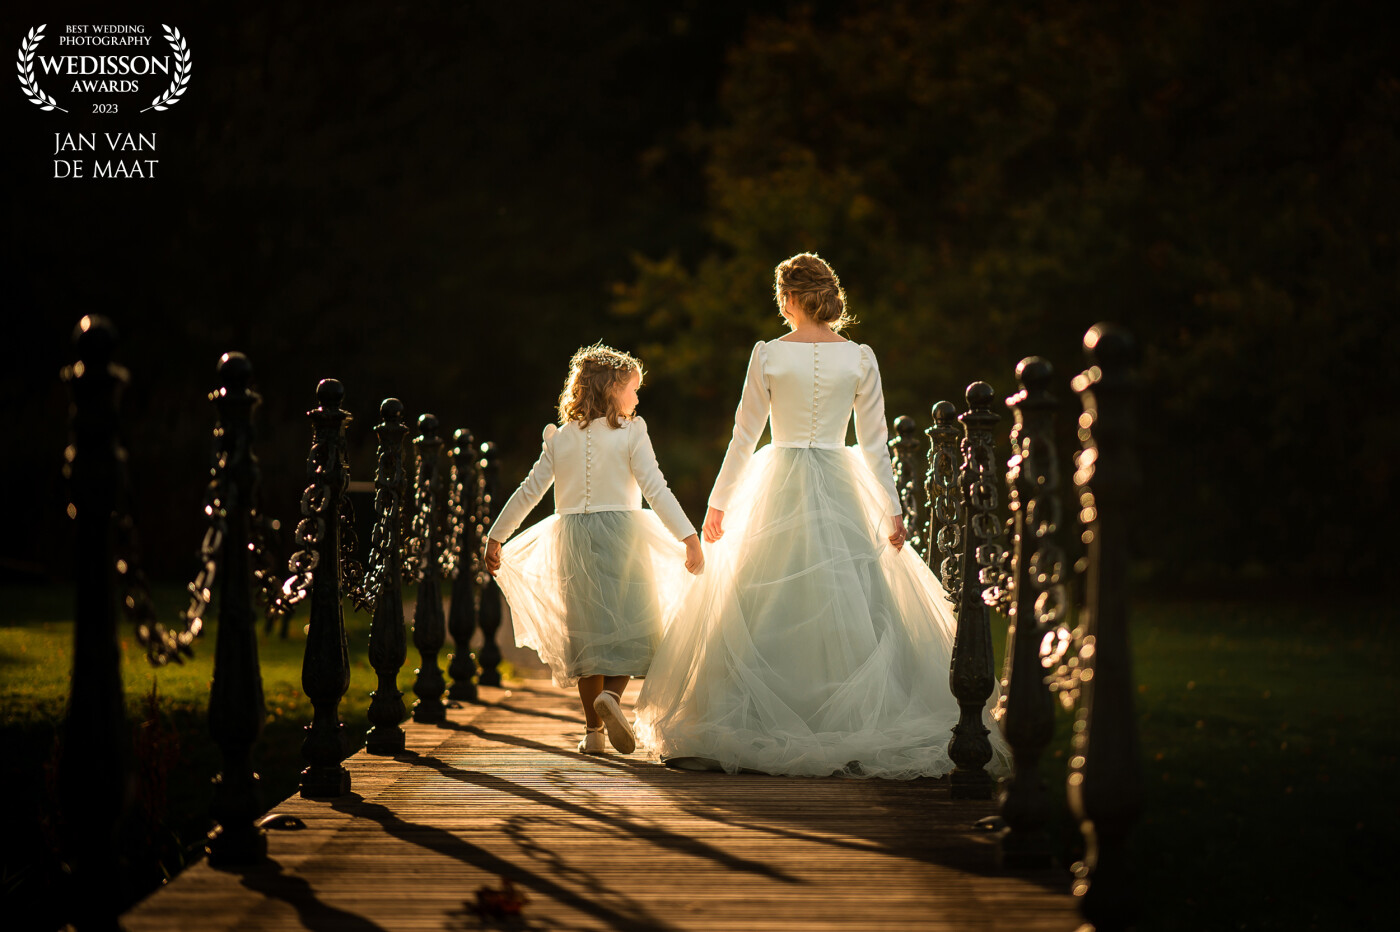 It was late in the afternoon and there was some time left for some extra photo's. I saw a small bridge with some really nice sunlight. I let the bride and her flower girl walk away from me and I love the way the light shines through the dresses a bit.